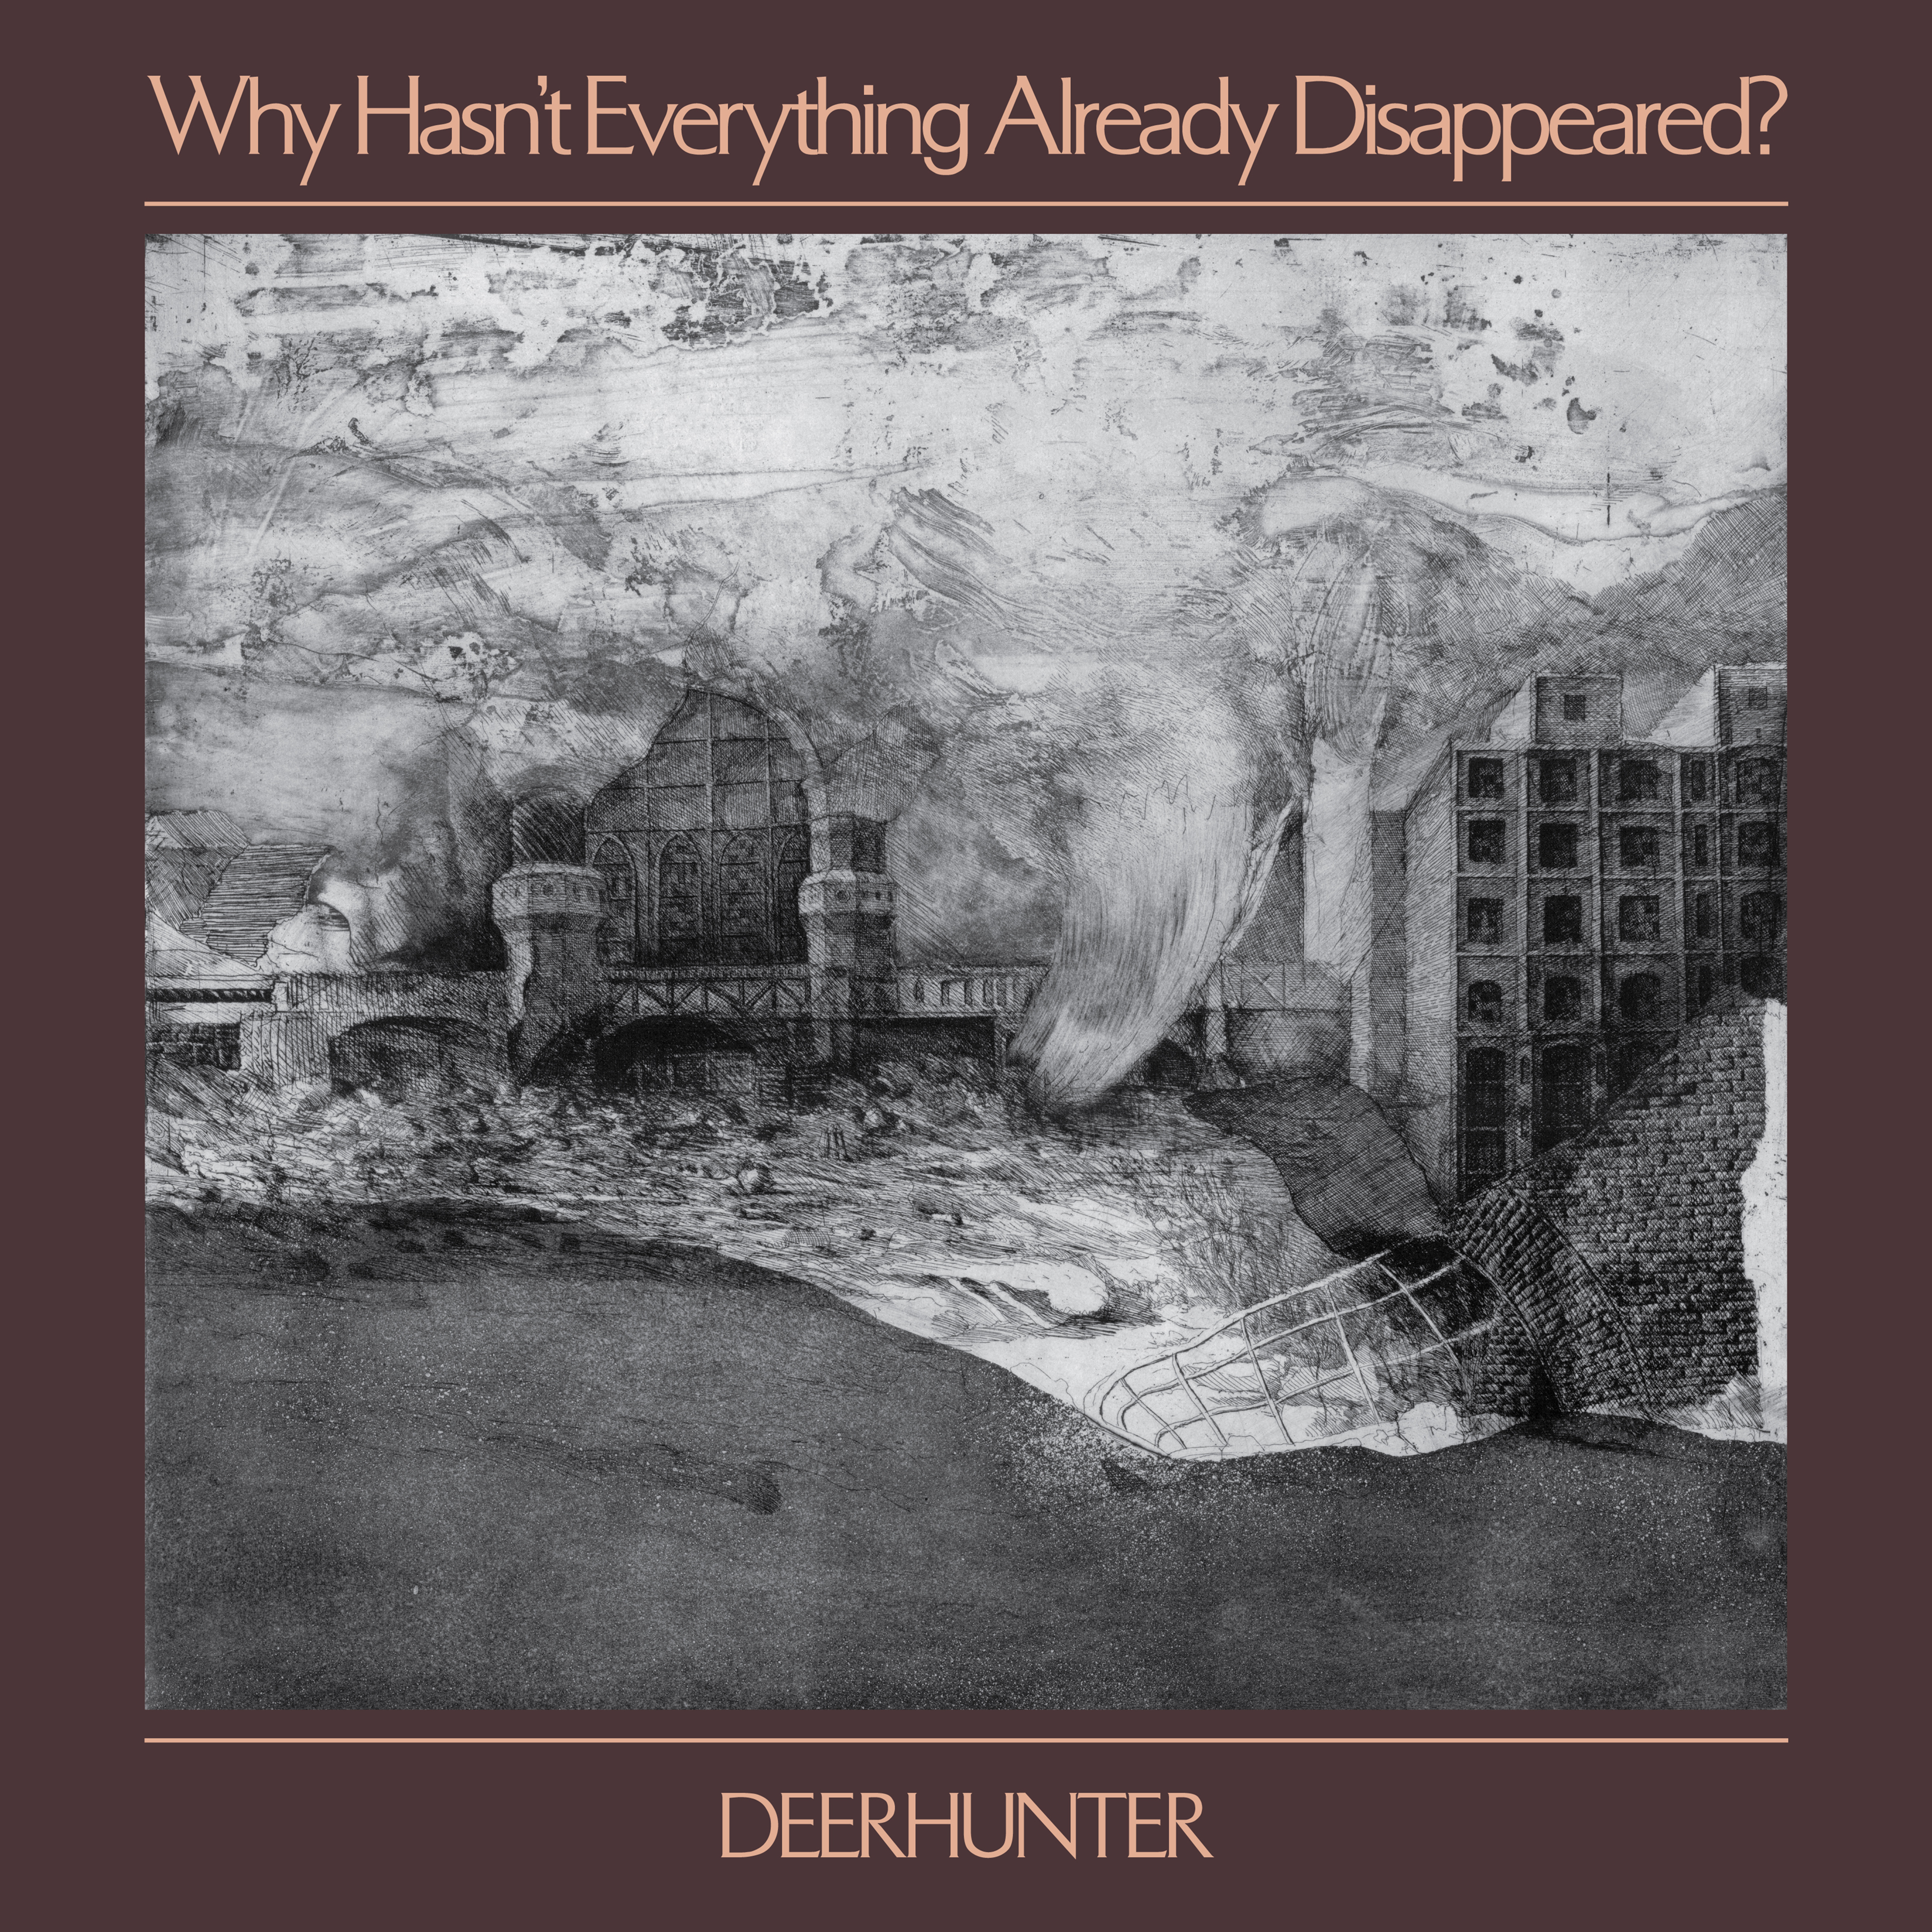 Deerhunter Announce New Album <i></noscript>Why Hasn’t Everything Already Disappeared?</i>, Release Video for “Death in Midsummer”” title=”Deerhunter” data-original-id=”308881″ data-adjusted-id=”308881″ class=”sm_size_full_width sm_alignment_center ” />
<p>11/4 SAO PAOLO, Balaclava Festival<br />
11/8 SANTIAGO, Blondie<br />
11/10 SANTIAGO, Fauna Primavera<br />
11/11 BUENOS AIRES, Personal Fest<br />
11/13 QUITO, La Ideal<br />
11/14 LIMA, Sala Raimondi<br />
1/17 LOS ANGELES, CA Lodge Room (with Confusing Mix of Nations)<br />
1/21 OSAKA, Bigcat (with Gang Gang Dance)<br />
1/22 NAGOYA, Electric Ladyland<br />
1/23 TOKYO, O-East<br />
2/15 NASHVILLE, TN Cannery Ballroom (with Faye Webster)<br />
2/18 CLEVELAND, OH Mahall’s 20 Lanes (with Mary Lattimore)<br />
2/19 DETROIT, MI El Club (with Mary Lattimore)<br />
2/21 TORONTO, ON Danforth Music Hall (with Mary Lattimore)<br />
2/22 MONTREAL, QC Le National (with Mary Lattimore)<br />
2/23 NEW HAVEN, CT College Street Music Hall (with Mary Lattimore)<br />
2/24 BOSTON, MA Royale (with Mary Lattimore)<br />
2/27 BROOKLYN, NY Brooklyn Steel (with Mary Lattimore, L’Rain)<br />
3/1 PHILADELPHIA, PA Union Transfer (with L’Rain)<br />
3/2 WASHINGTON DC 9:30 Club (with L’Rain)<br />
3/3 BALTIMORE, MD Ottobar<br />
3/5 PITTSBURGH, PA Mr. Small’s Theatre (with L’Rain)<br />
3/6 LOUISVILLE, KY Headliner’s Music Hall (with L’Rain)<br />
3/8 SAVANNAH, GA Savannah Stopover Music Festival</p>
</div>
</div>
</div>
</div>
</div>
</section>
<section data-particle_enable=